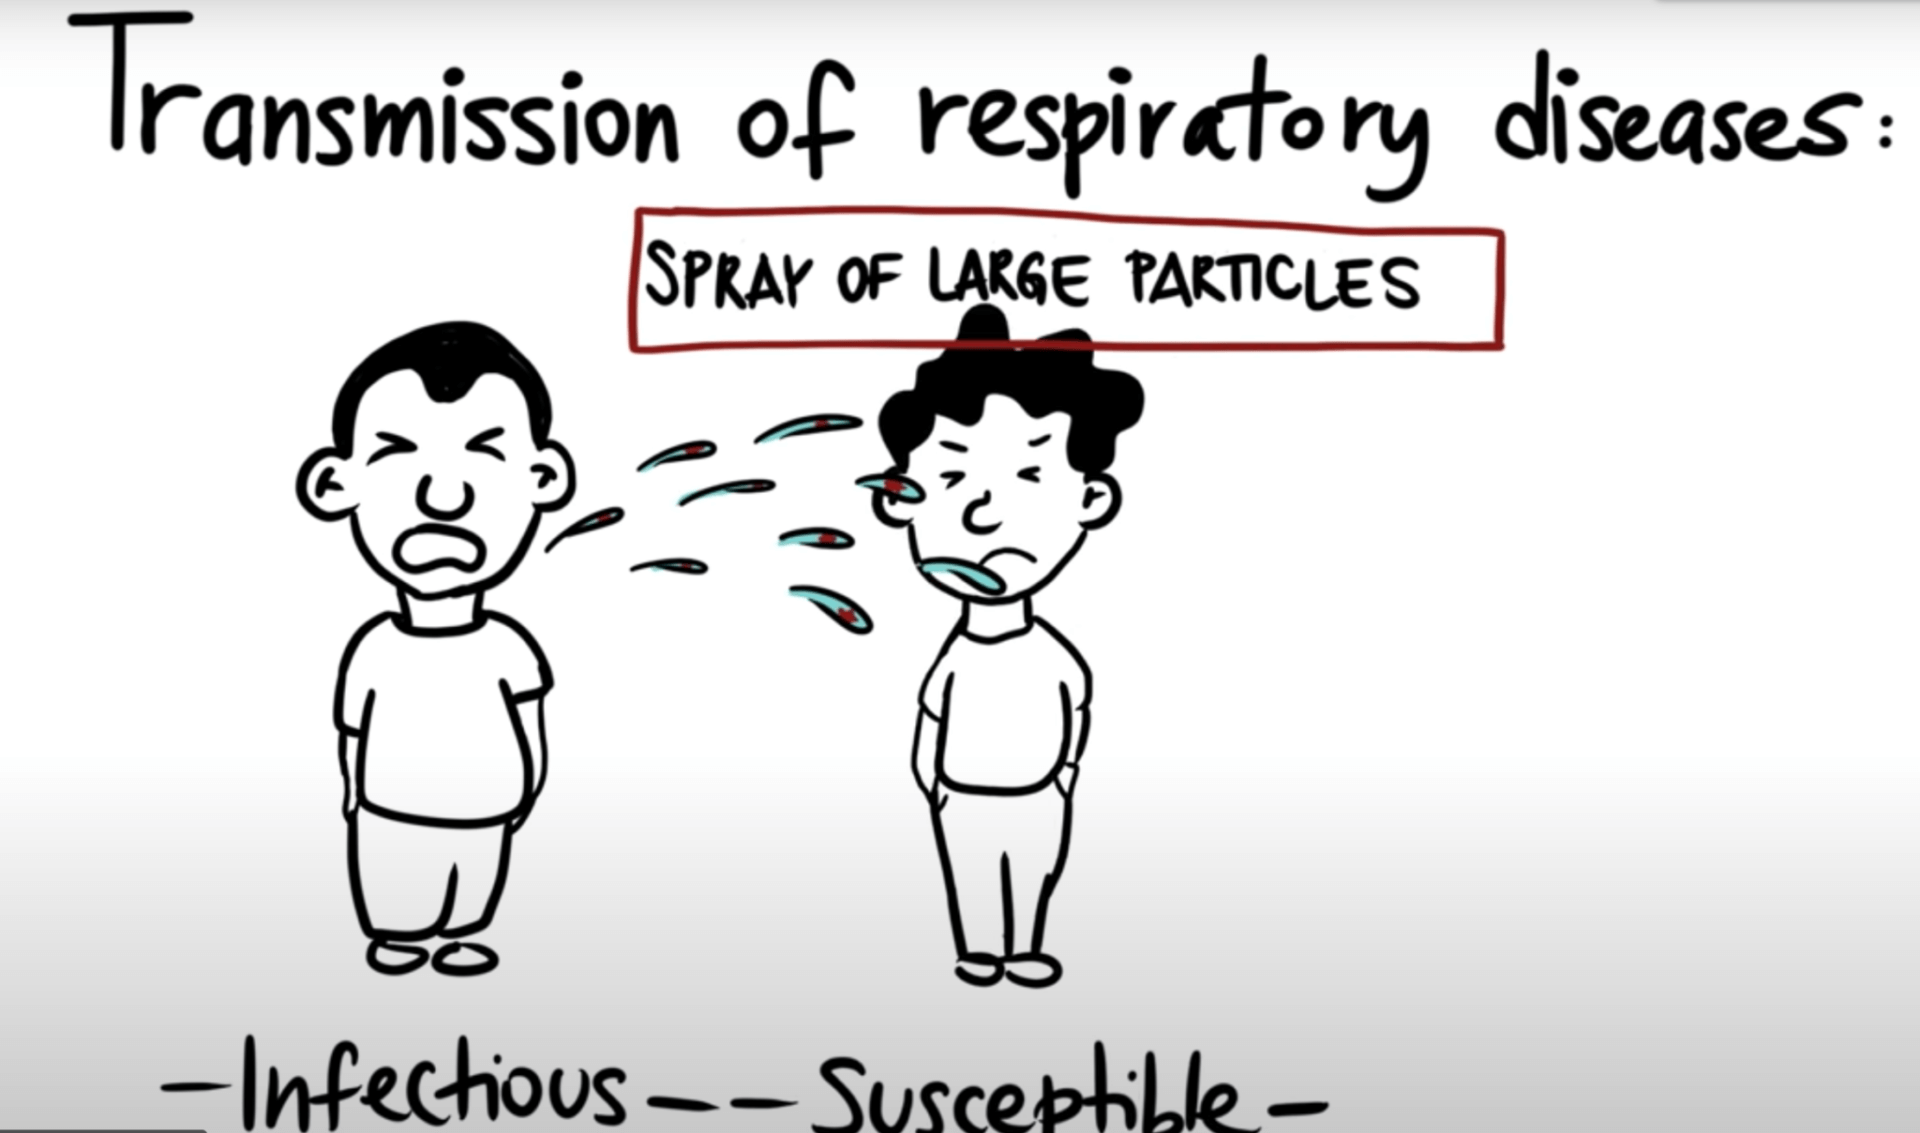 [CREDIT: Professor Shelly Miller, U. Colorado] A still from a video showing the use of masks against close-contact spread of respiratory disease, including COVID-19.